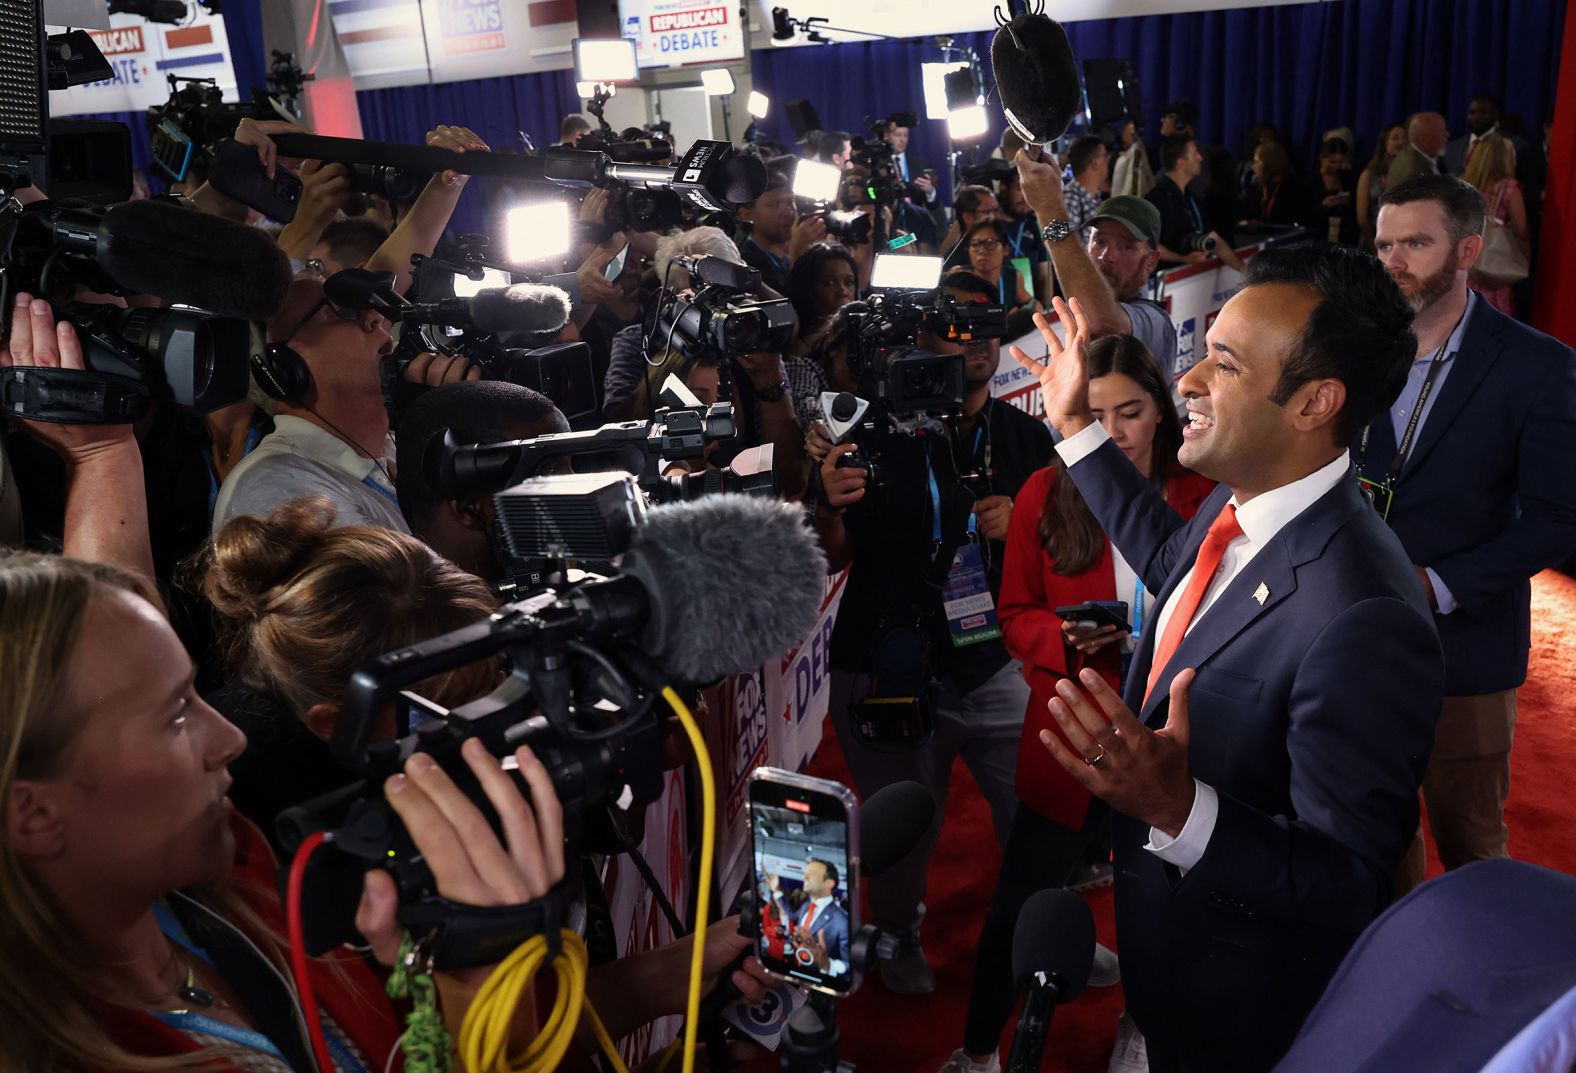 Ramaswamy talks to members of the media after the first Republican presidential debate.